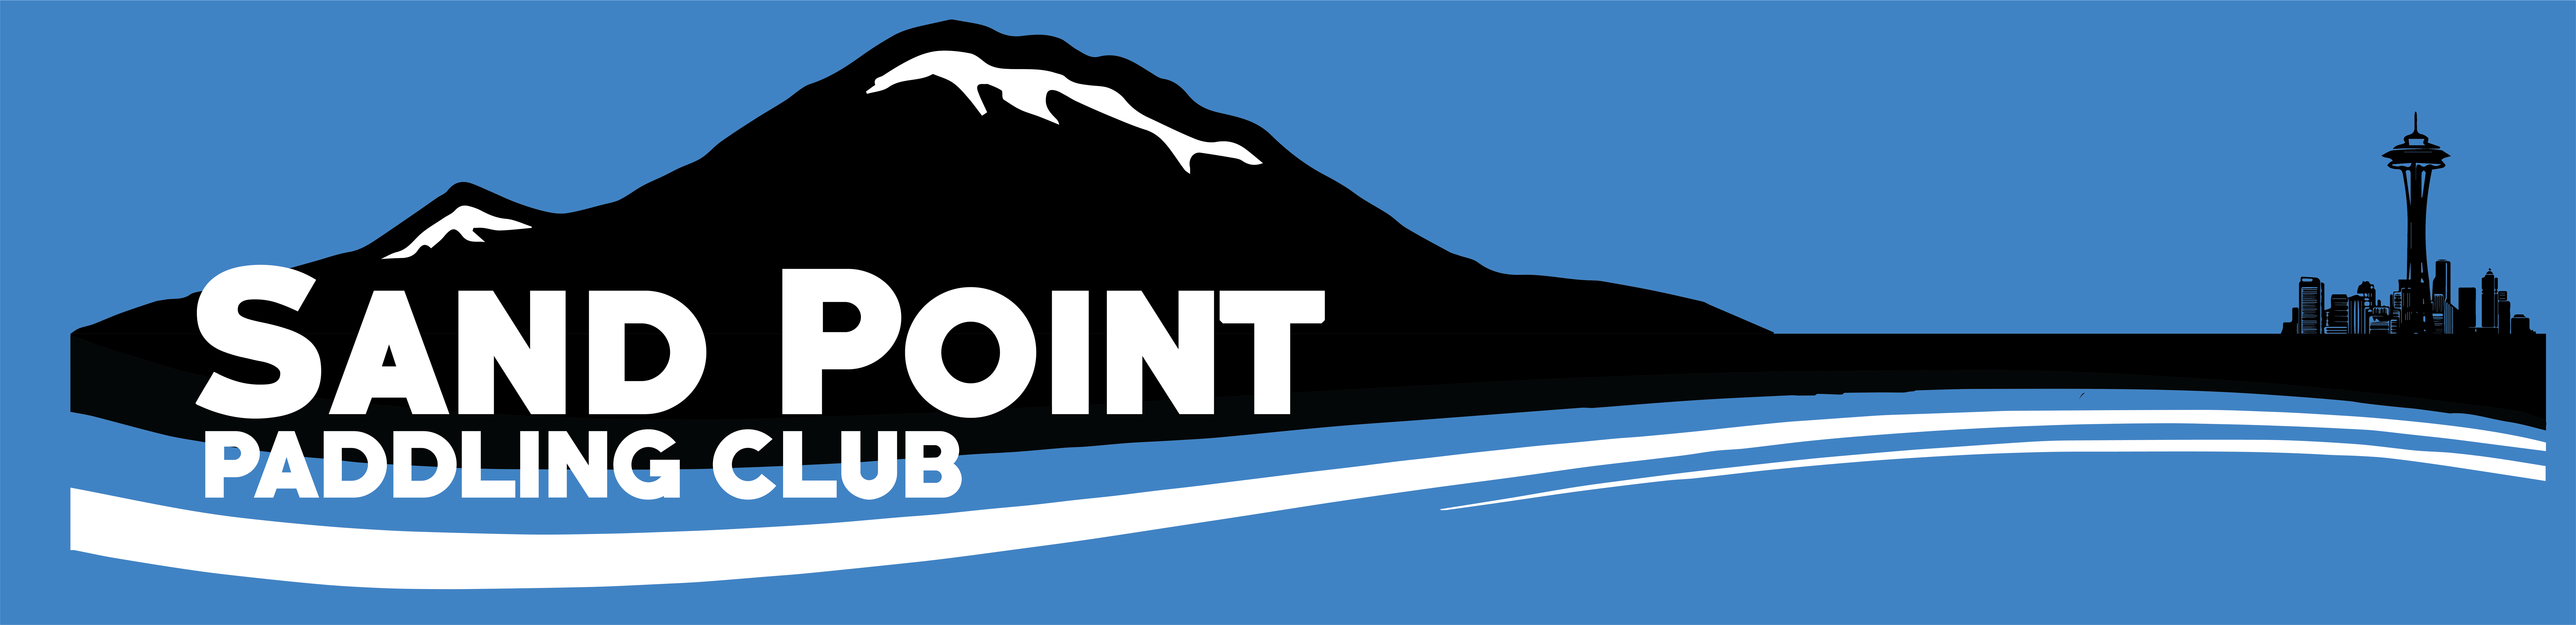 blue, black, and white logo for sand point paddling club in seattle